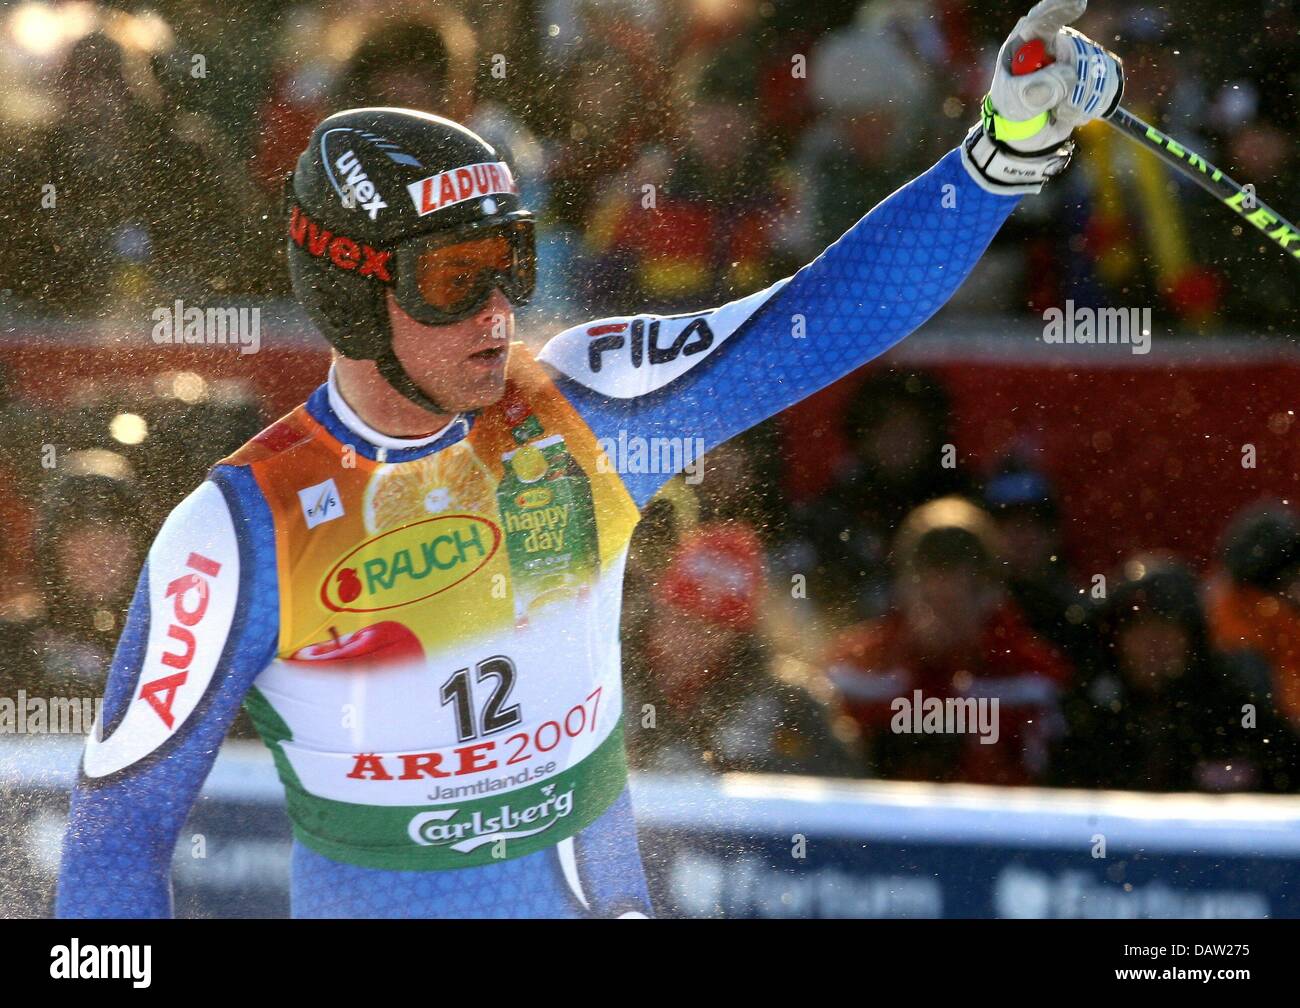 Italian Patrick Staudacher celebrates winning the Men's Super G of the Alpine Skiing World Championships Aare, Sweden, Tuesday, 06 February 2007. Patrick Staudacher of Italy clinched the Super G title, Fritz Strobl of Austria was second, Bruno Kernen of Switzerland was third. EPA/STEPHAN JANSEN Stock Photo